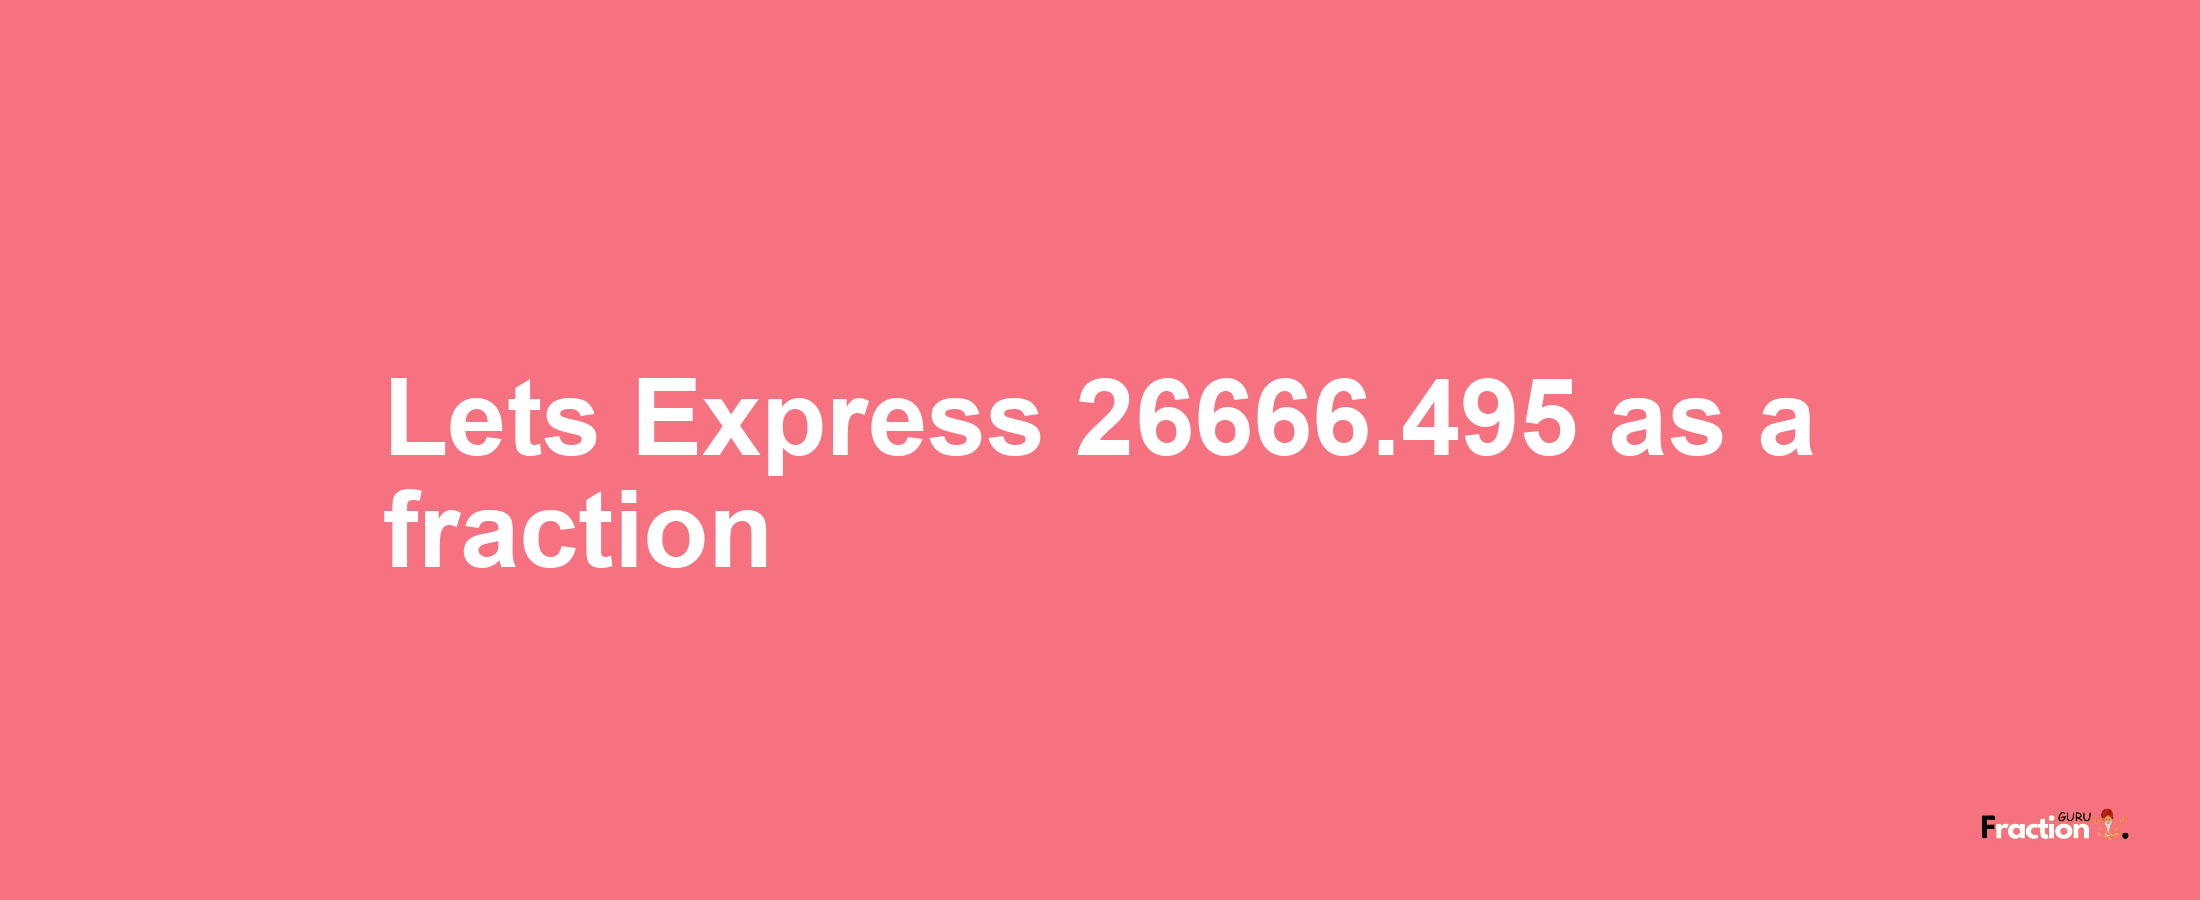 Lets Express 26666.495 as afraction